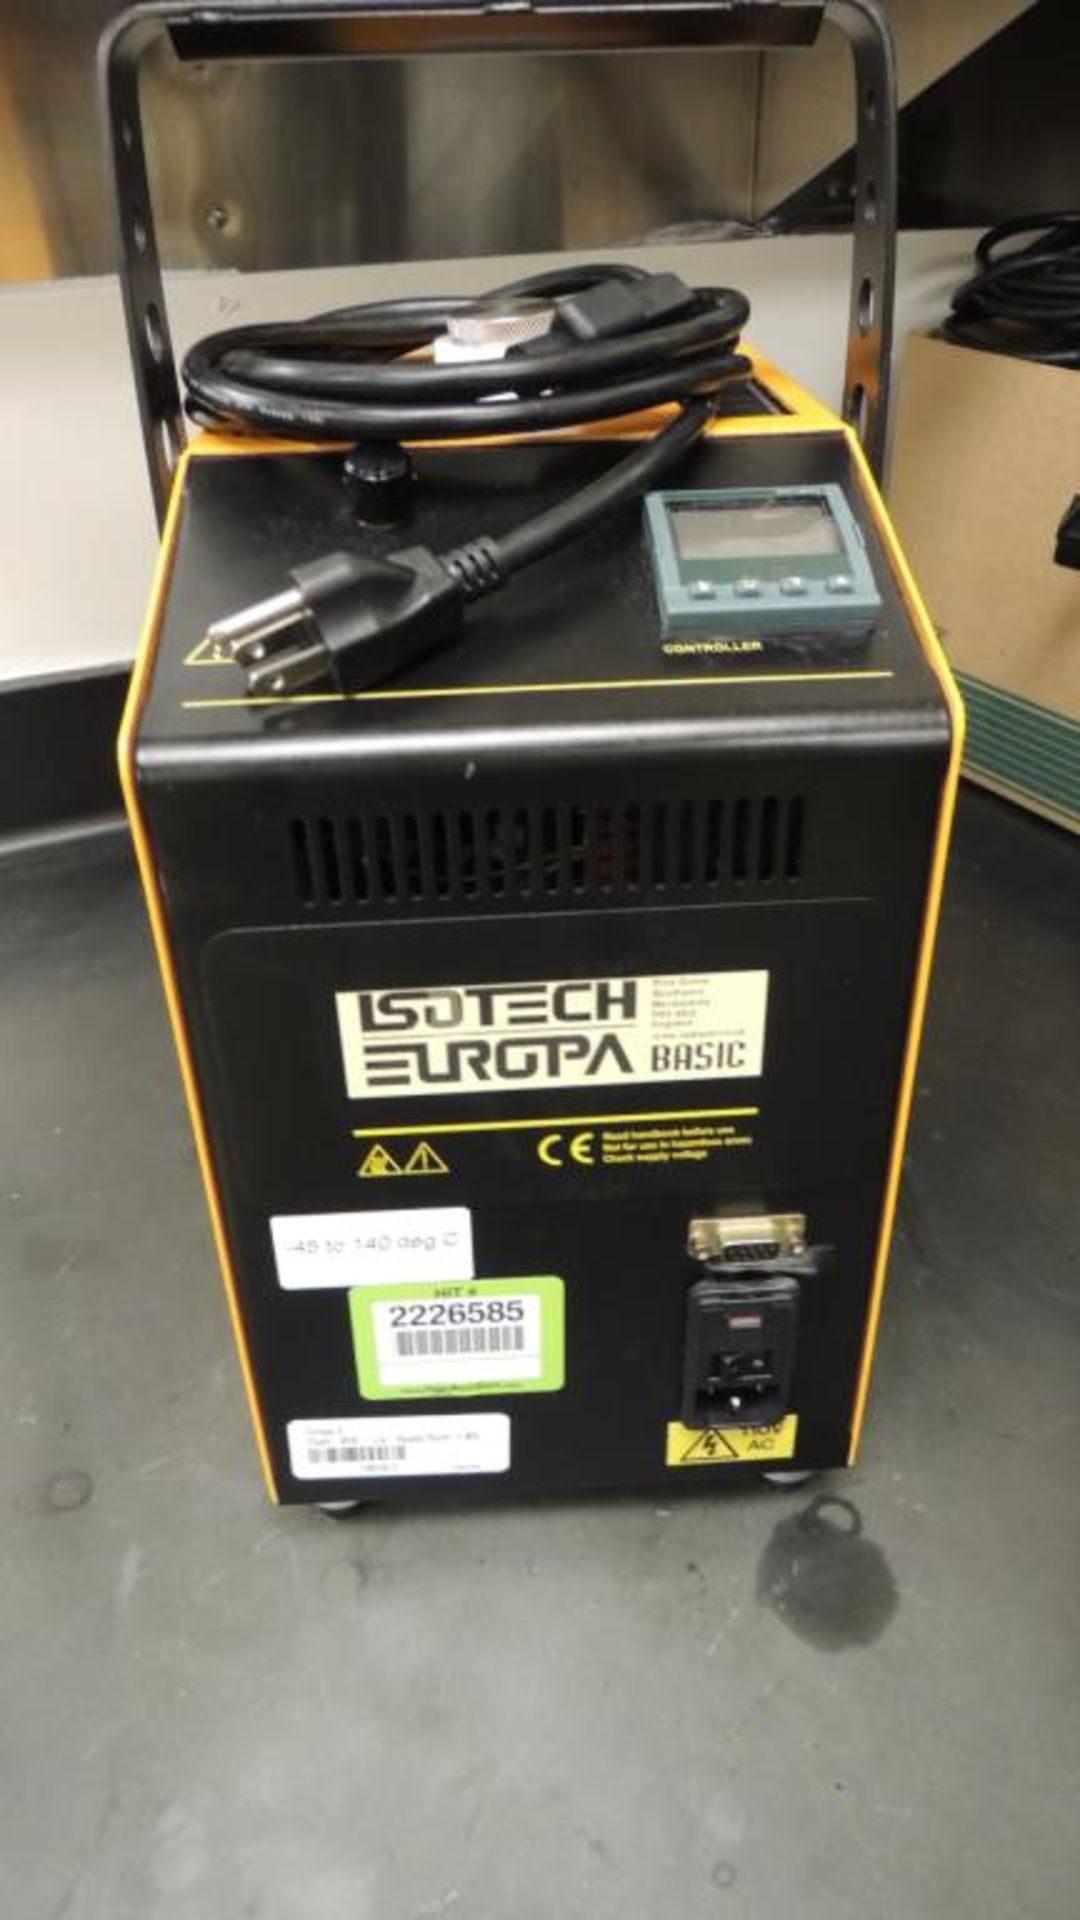 Isotech Europa 6 Bath; portable, product allows flexibility for the calibration of temperature